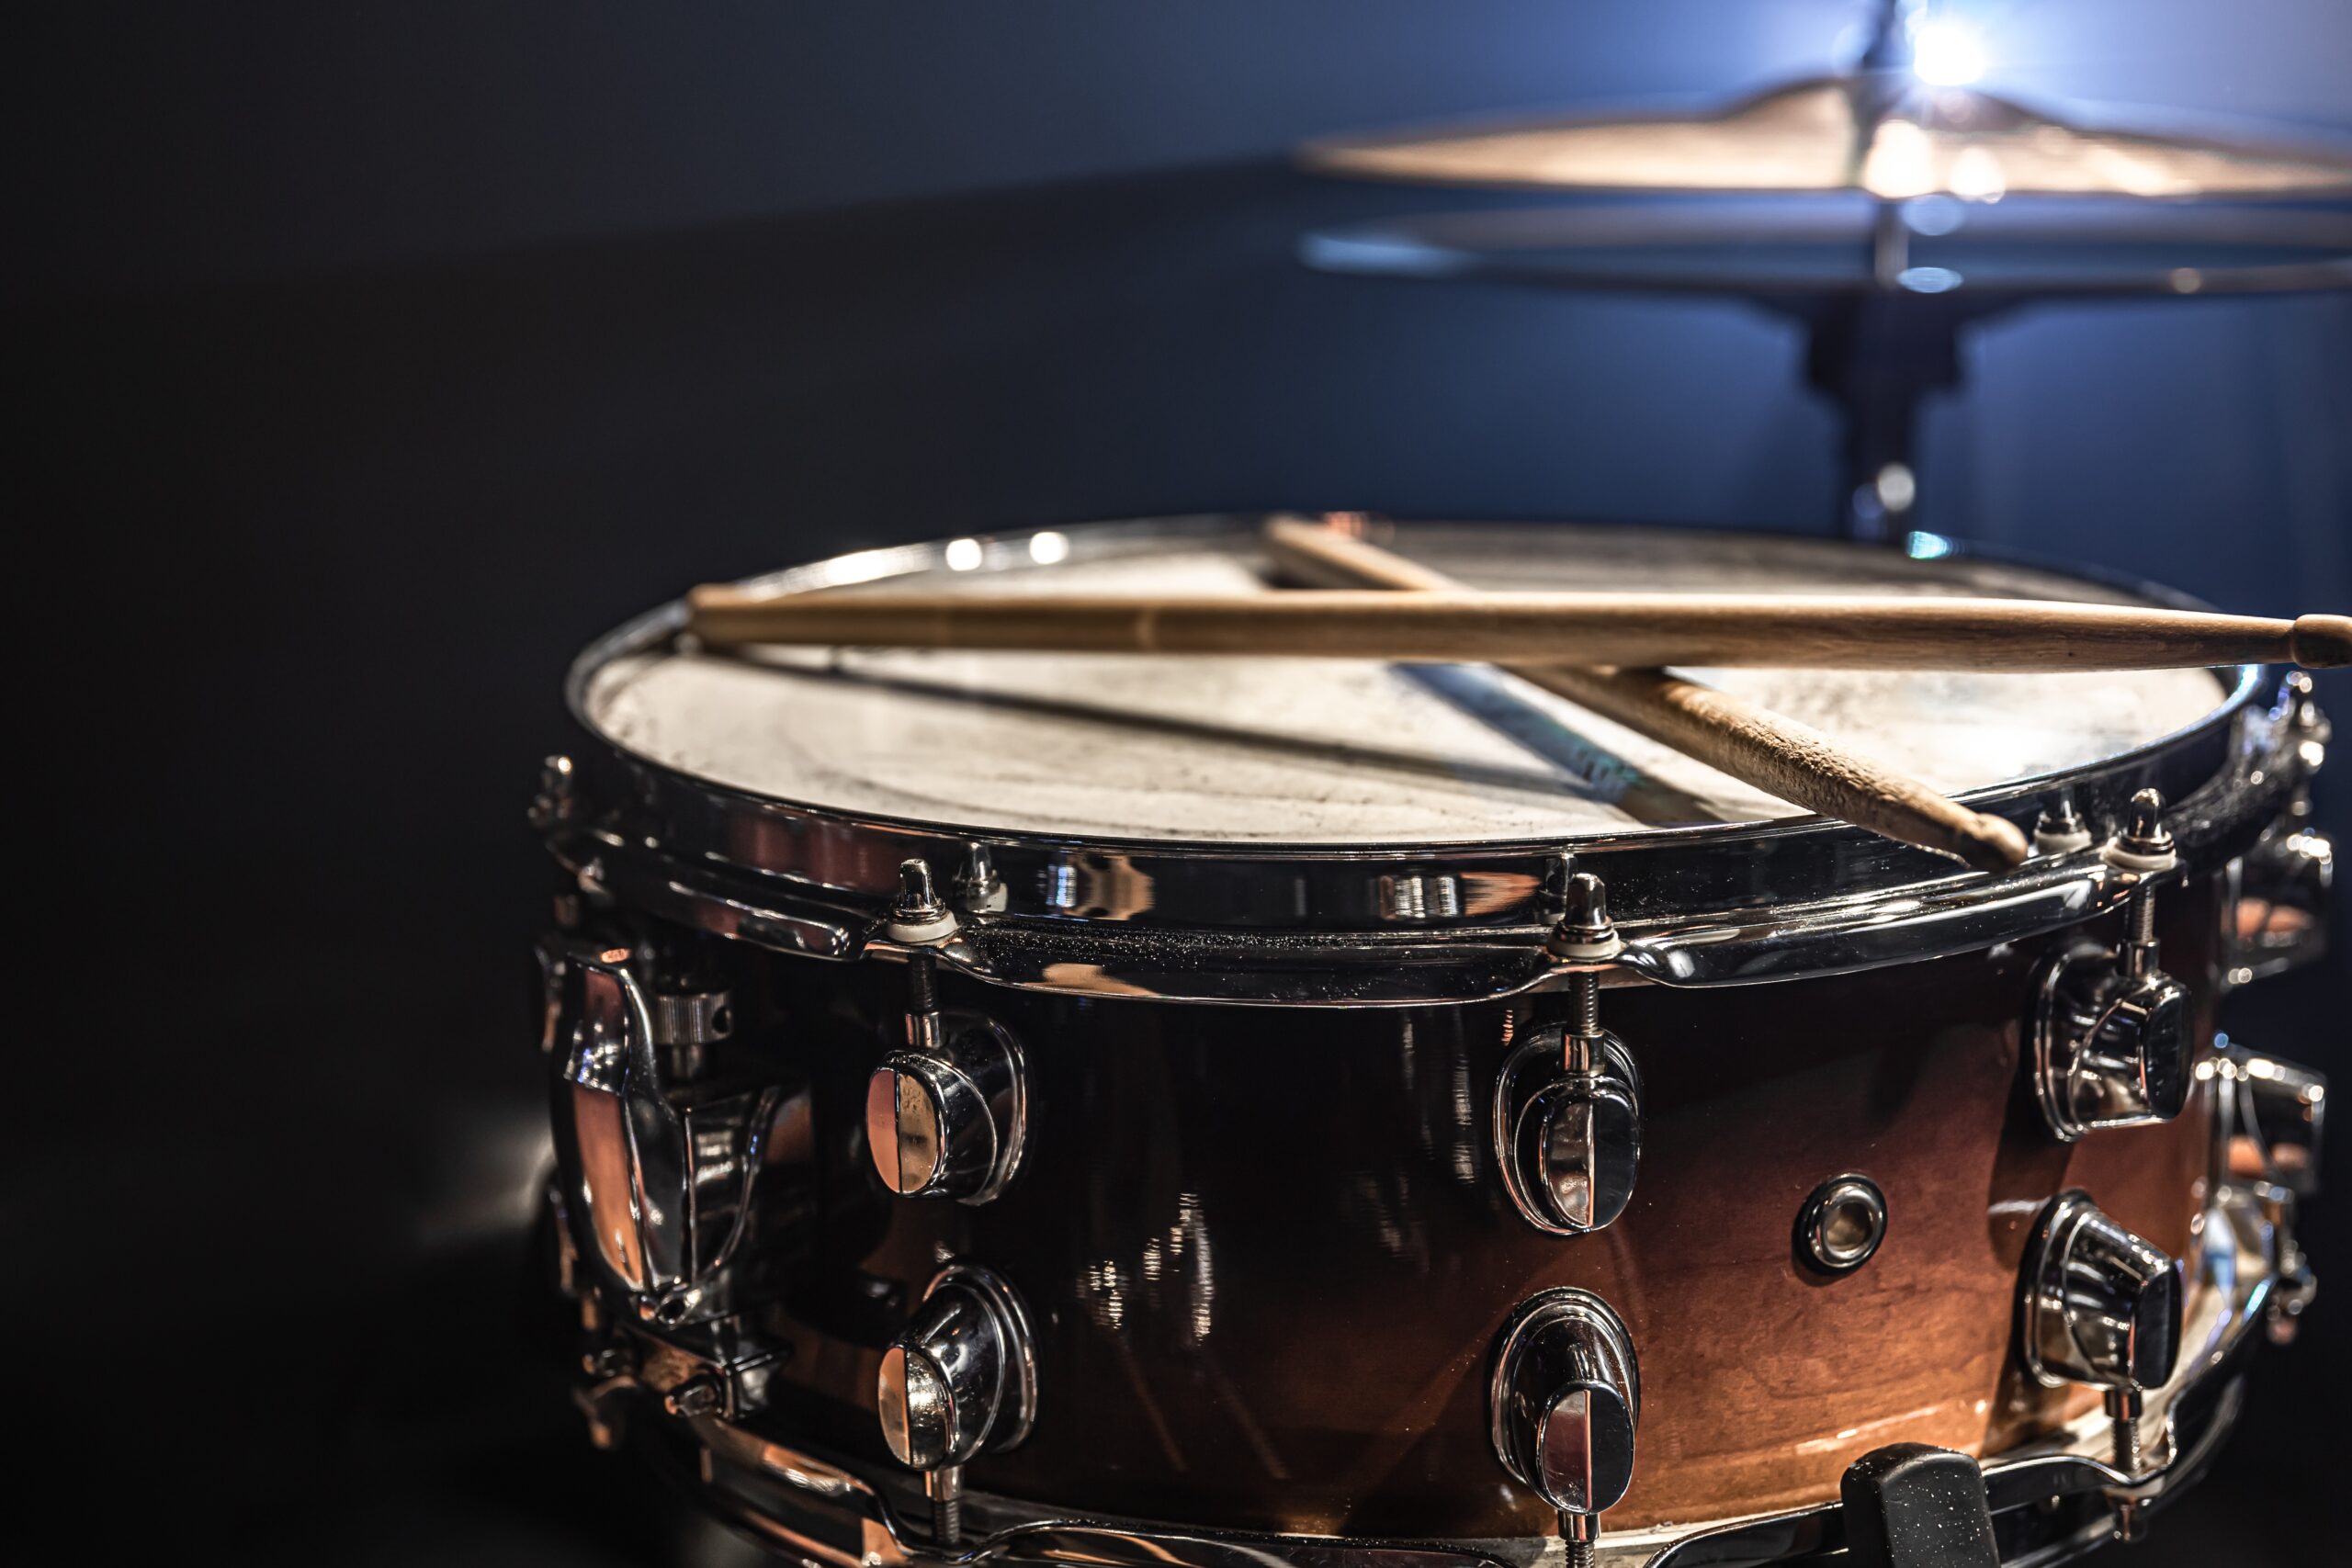 Snare drum, percussion instrument on a dark background with stage lighting.